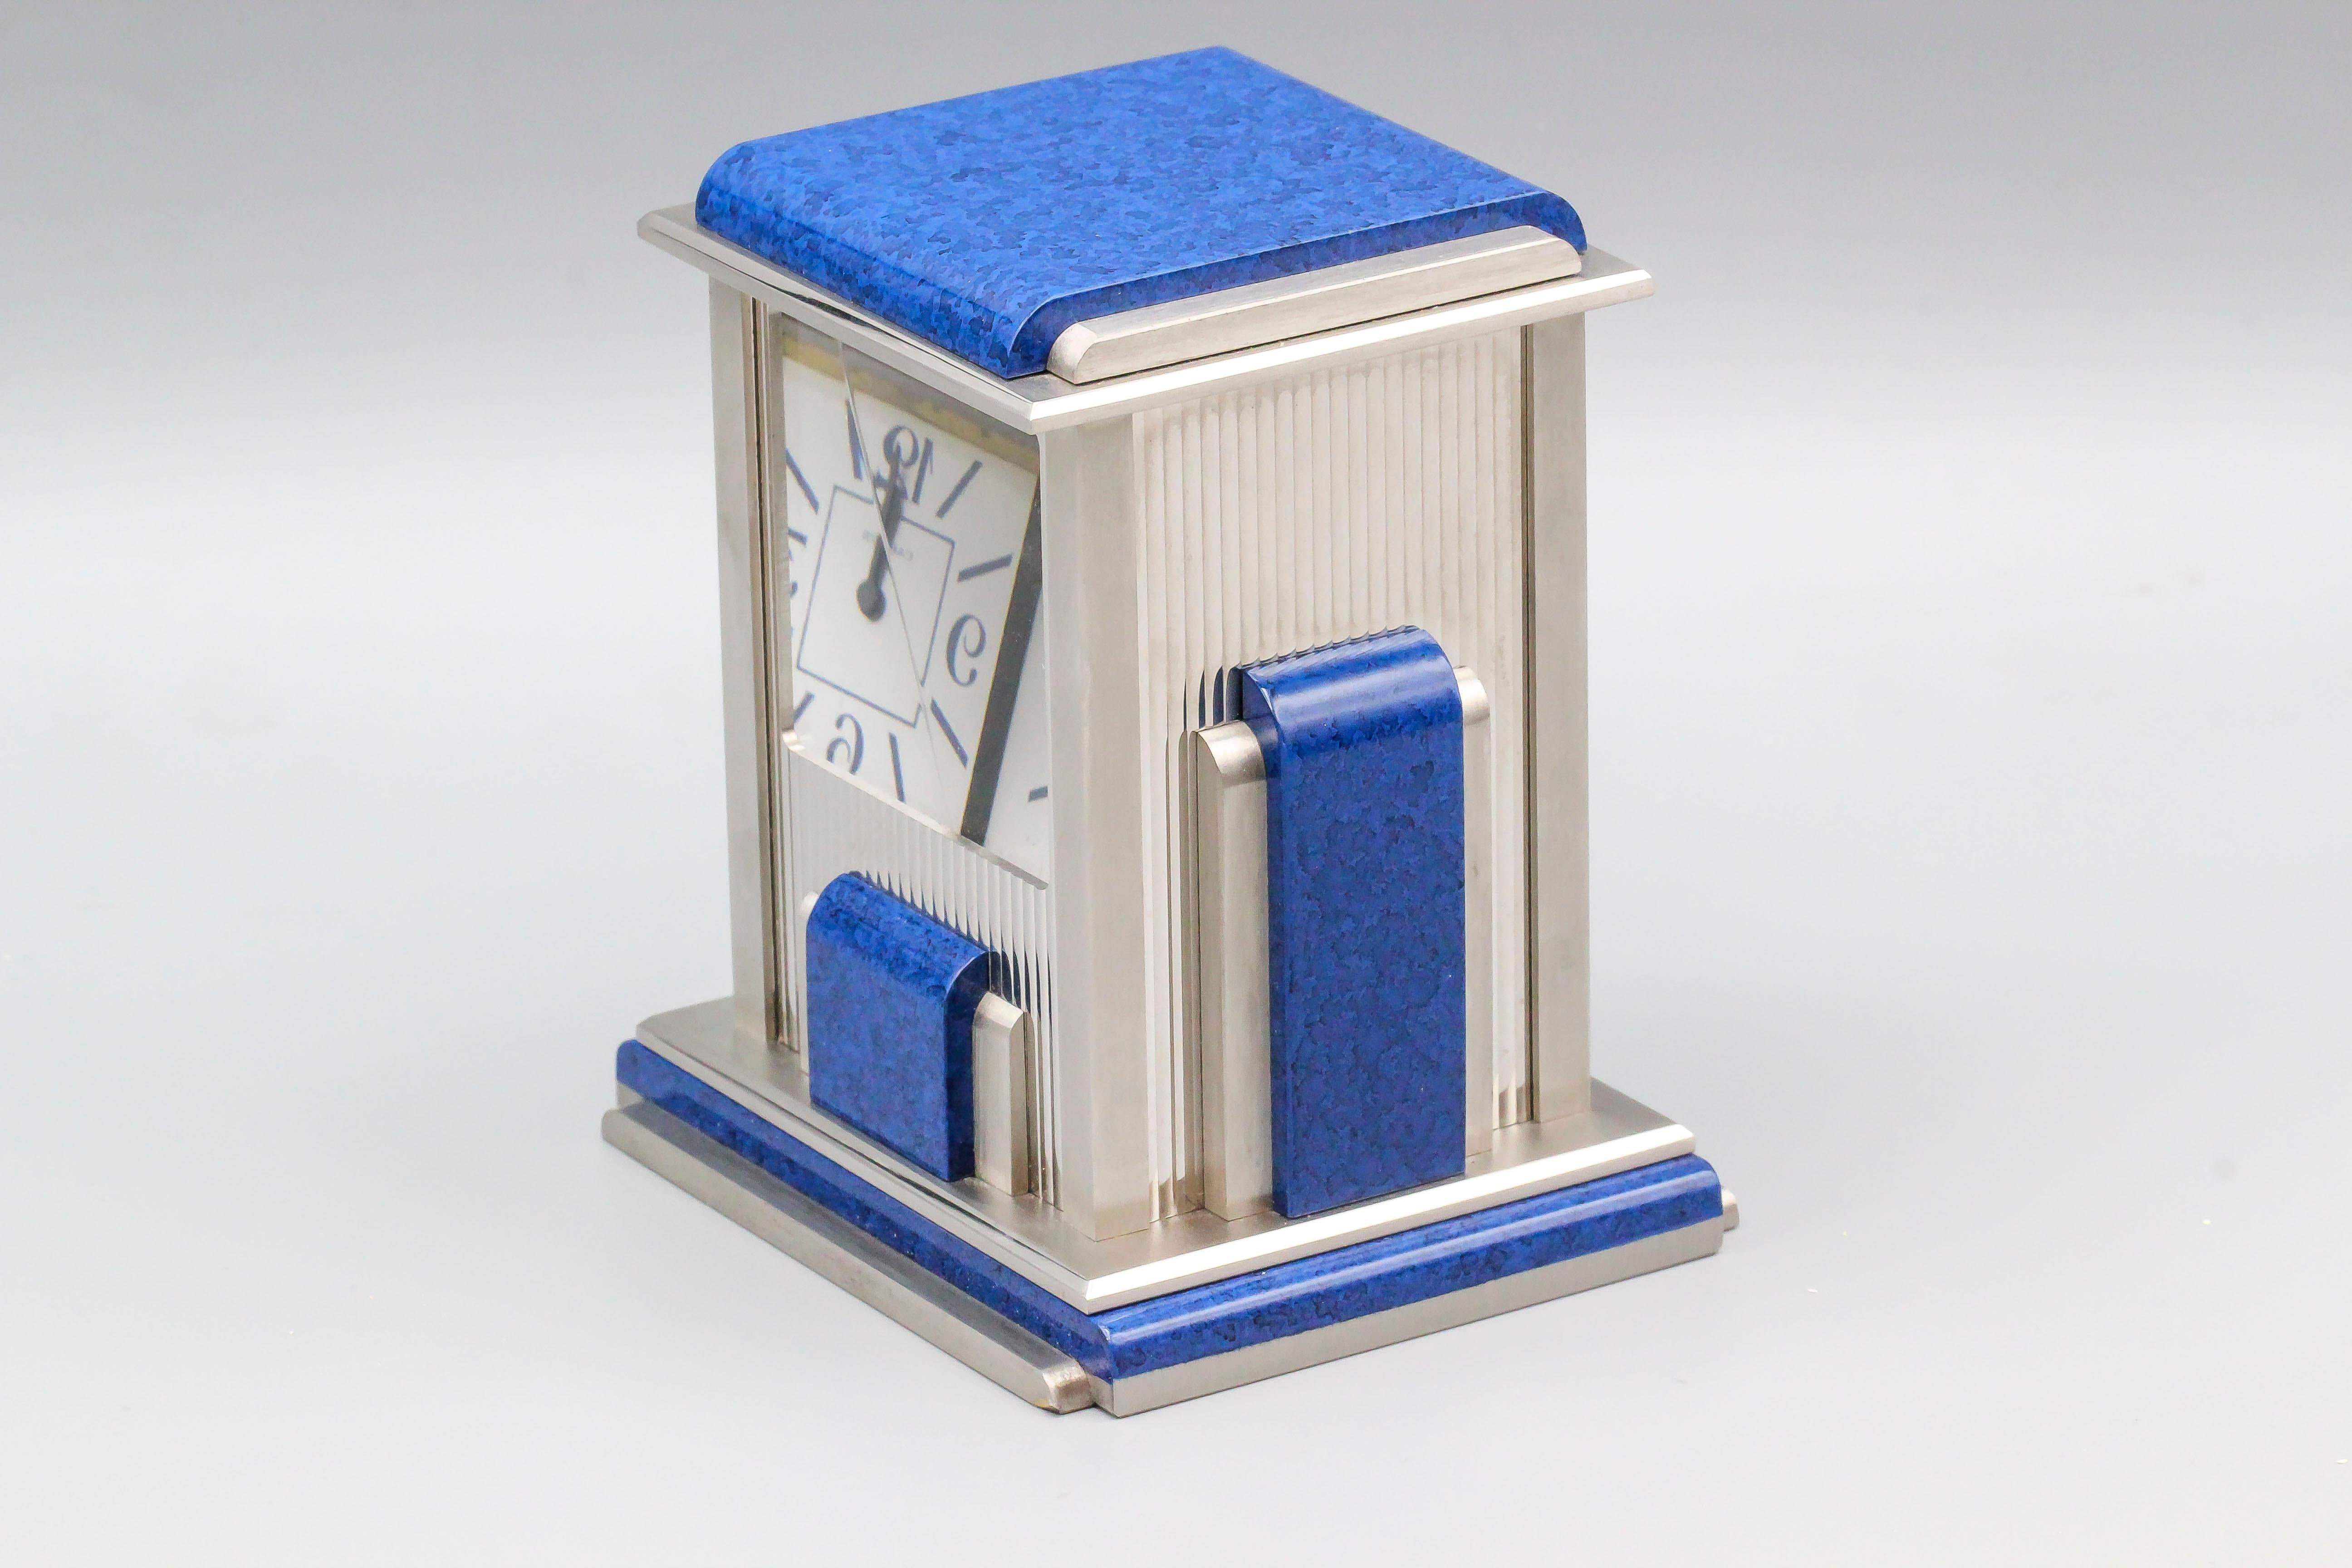 Fine estate clock, known as the Prism model, by Cartier circa 1990s. Working by showing a set of mirrors creating an illusion that the box is empty unless you look at a certain angle and you can see the face. Quartz movement with Roman numeral